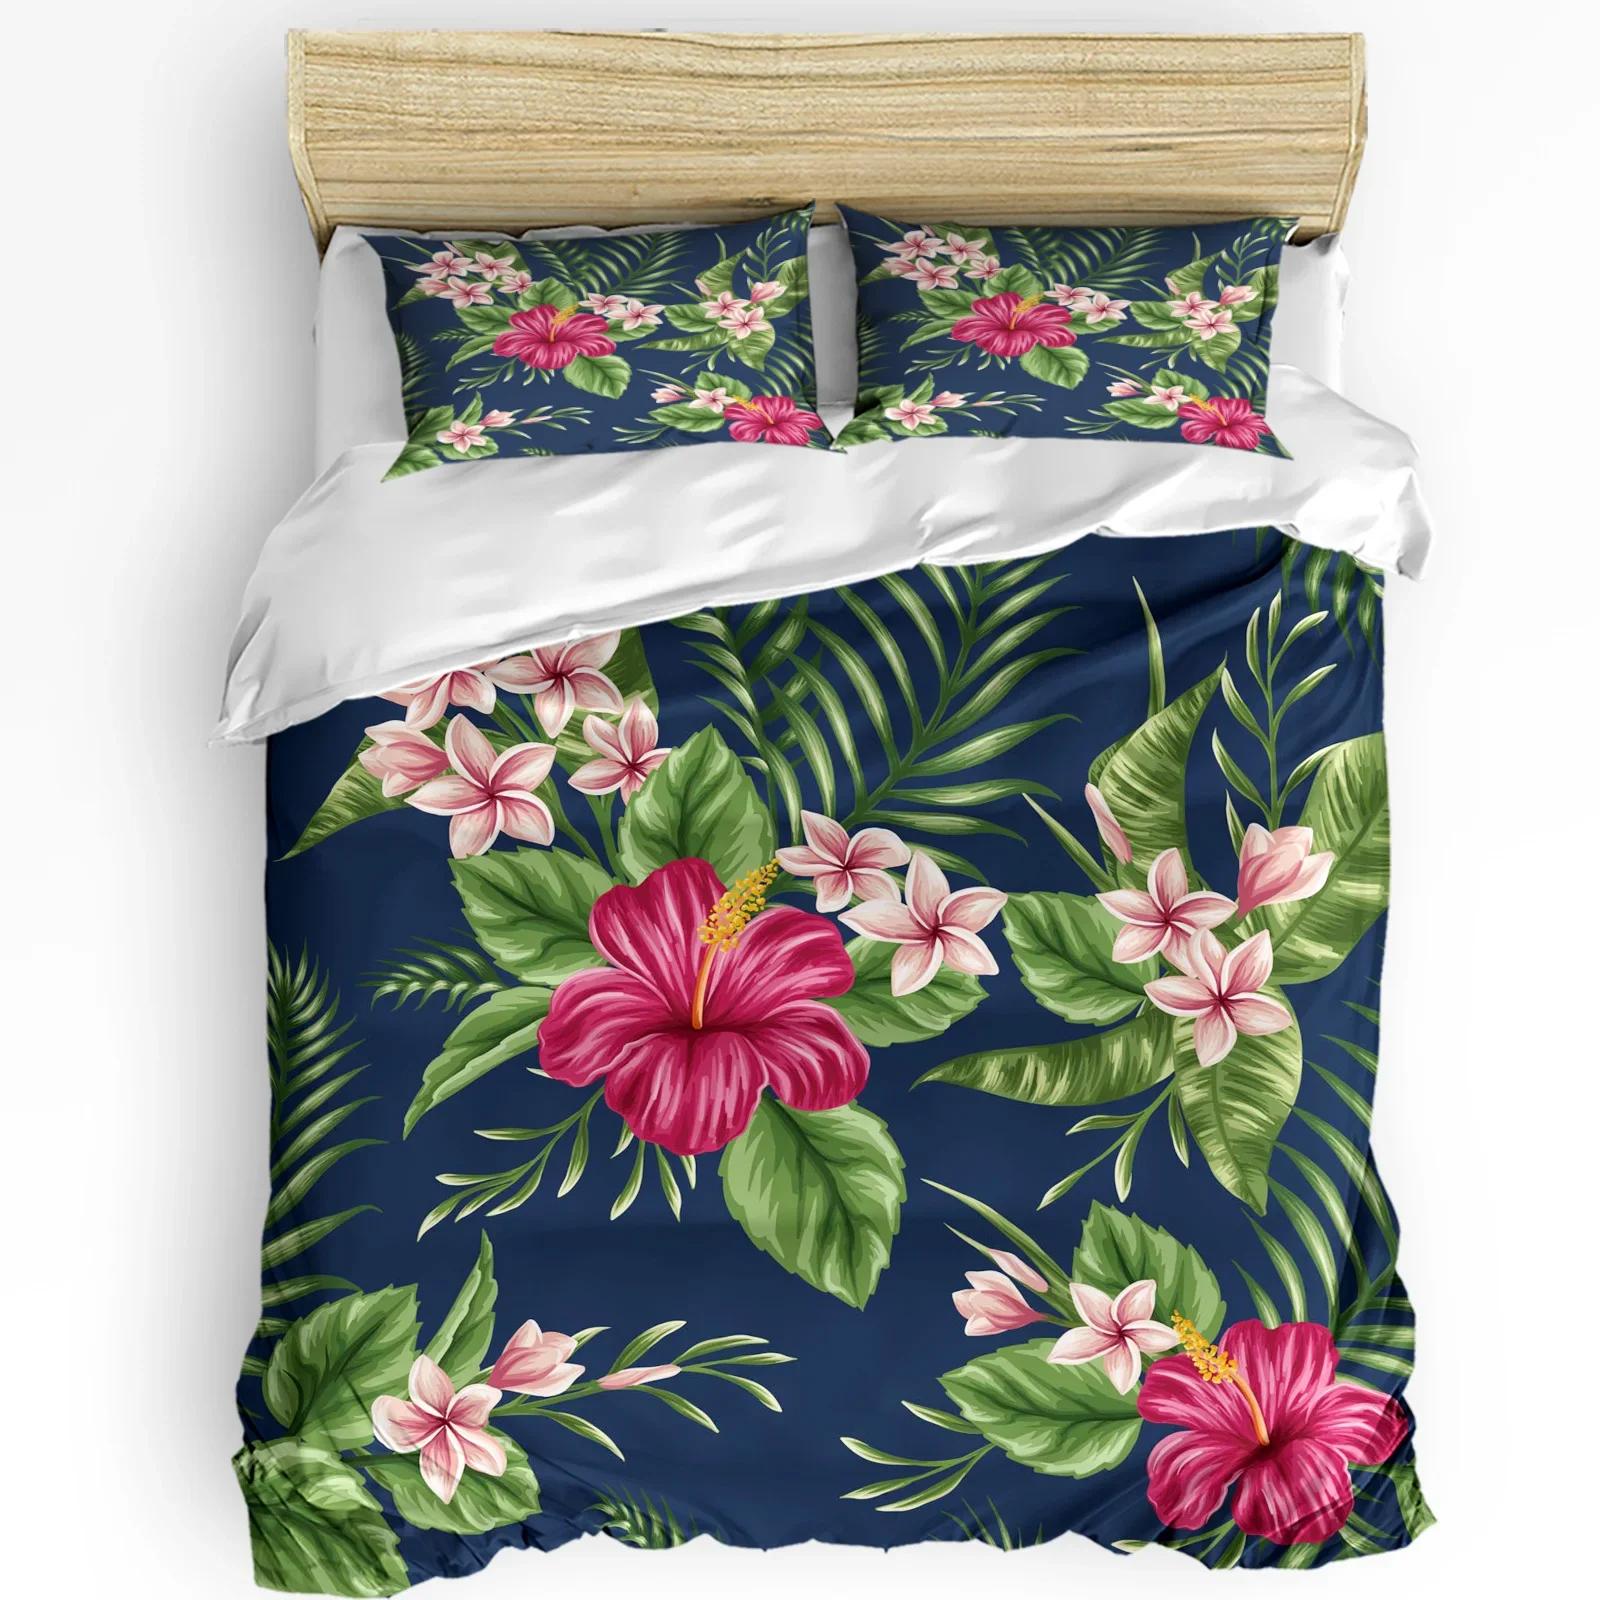 Flower Leaves Feather Hibiscus 3pcs Bedding Set For Bedroom Double Bed Home Textile Duvet Cover Quilt Cover Pillowca